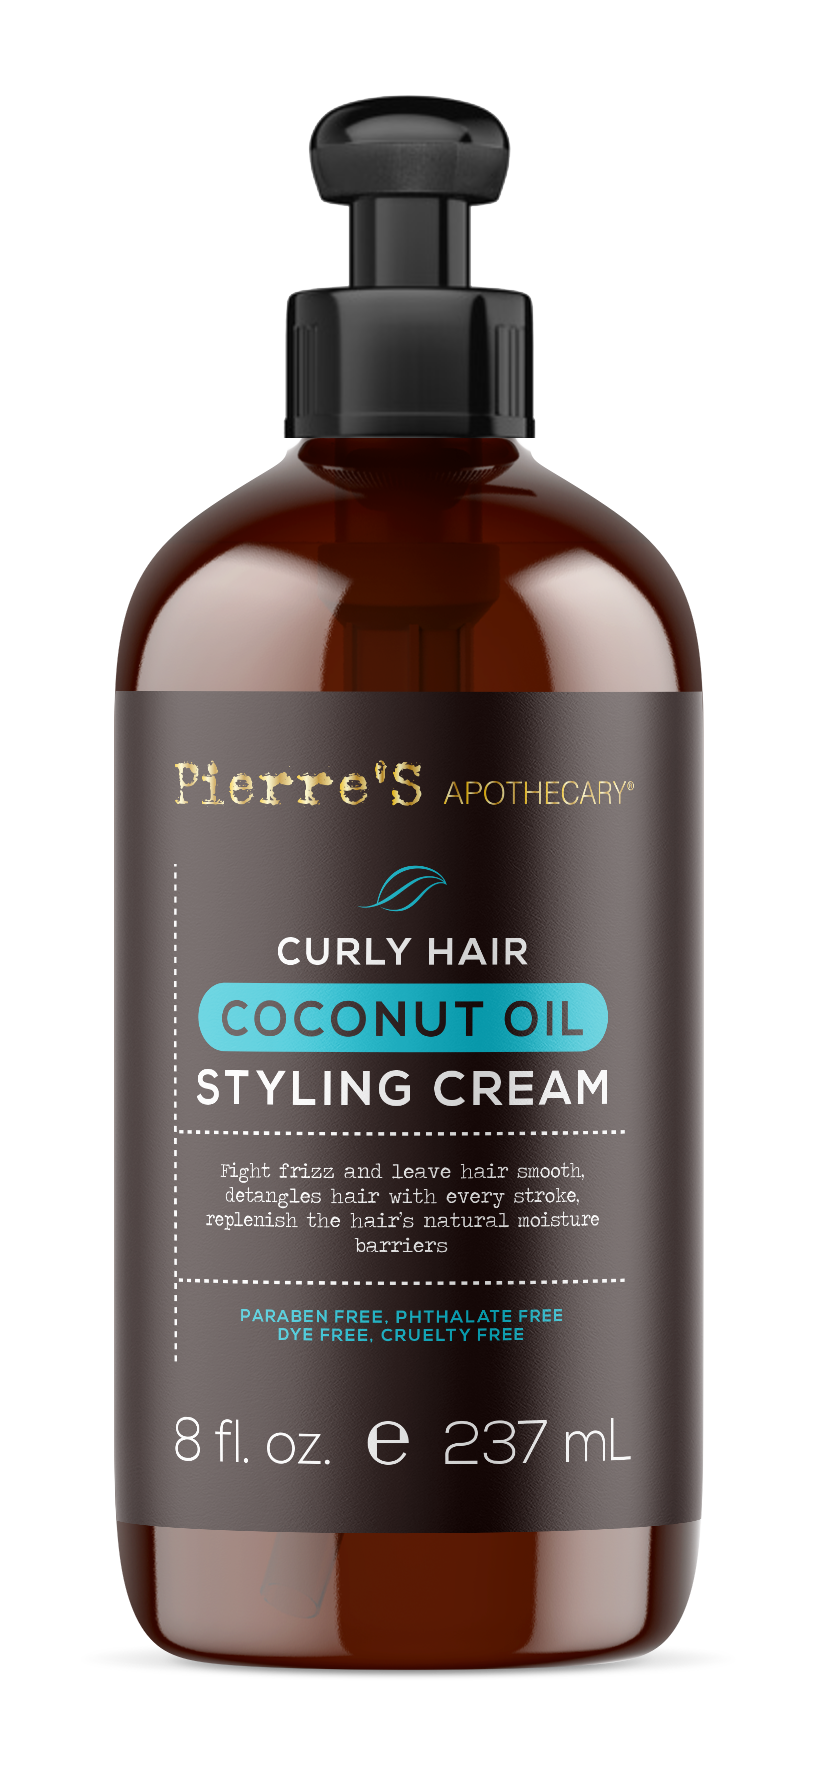 Curly Hair Coconut Oil Styling Cream